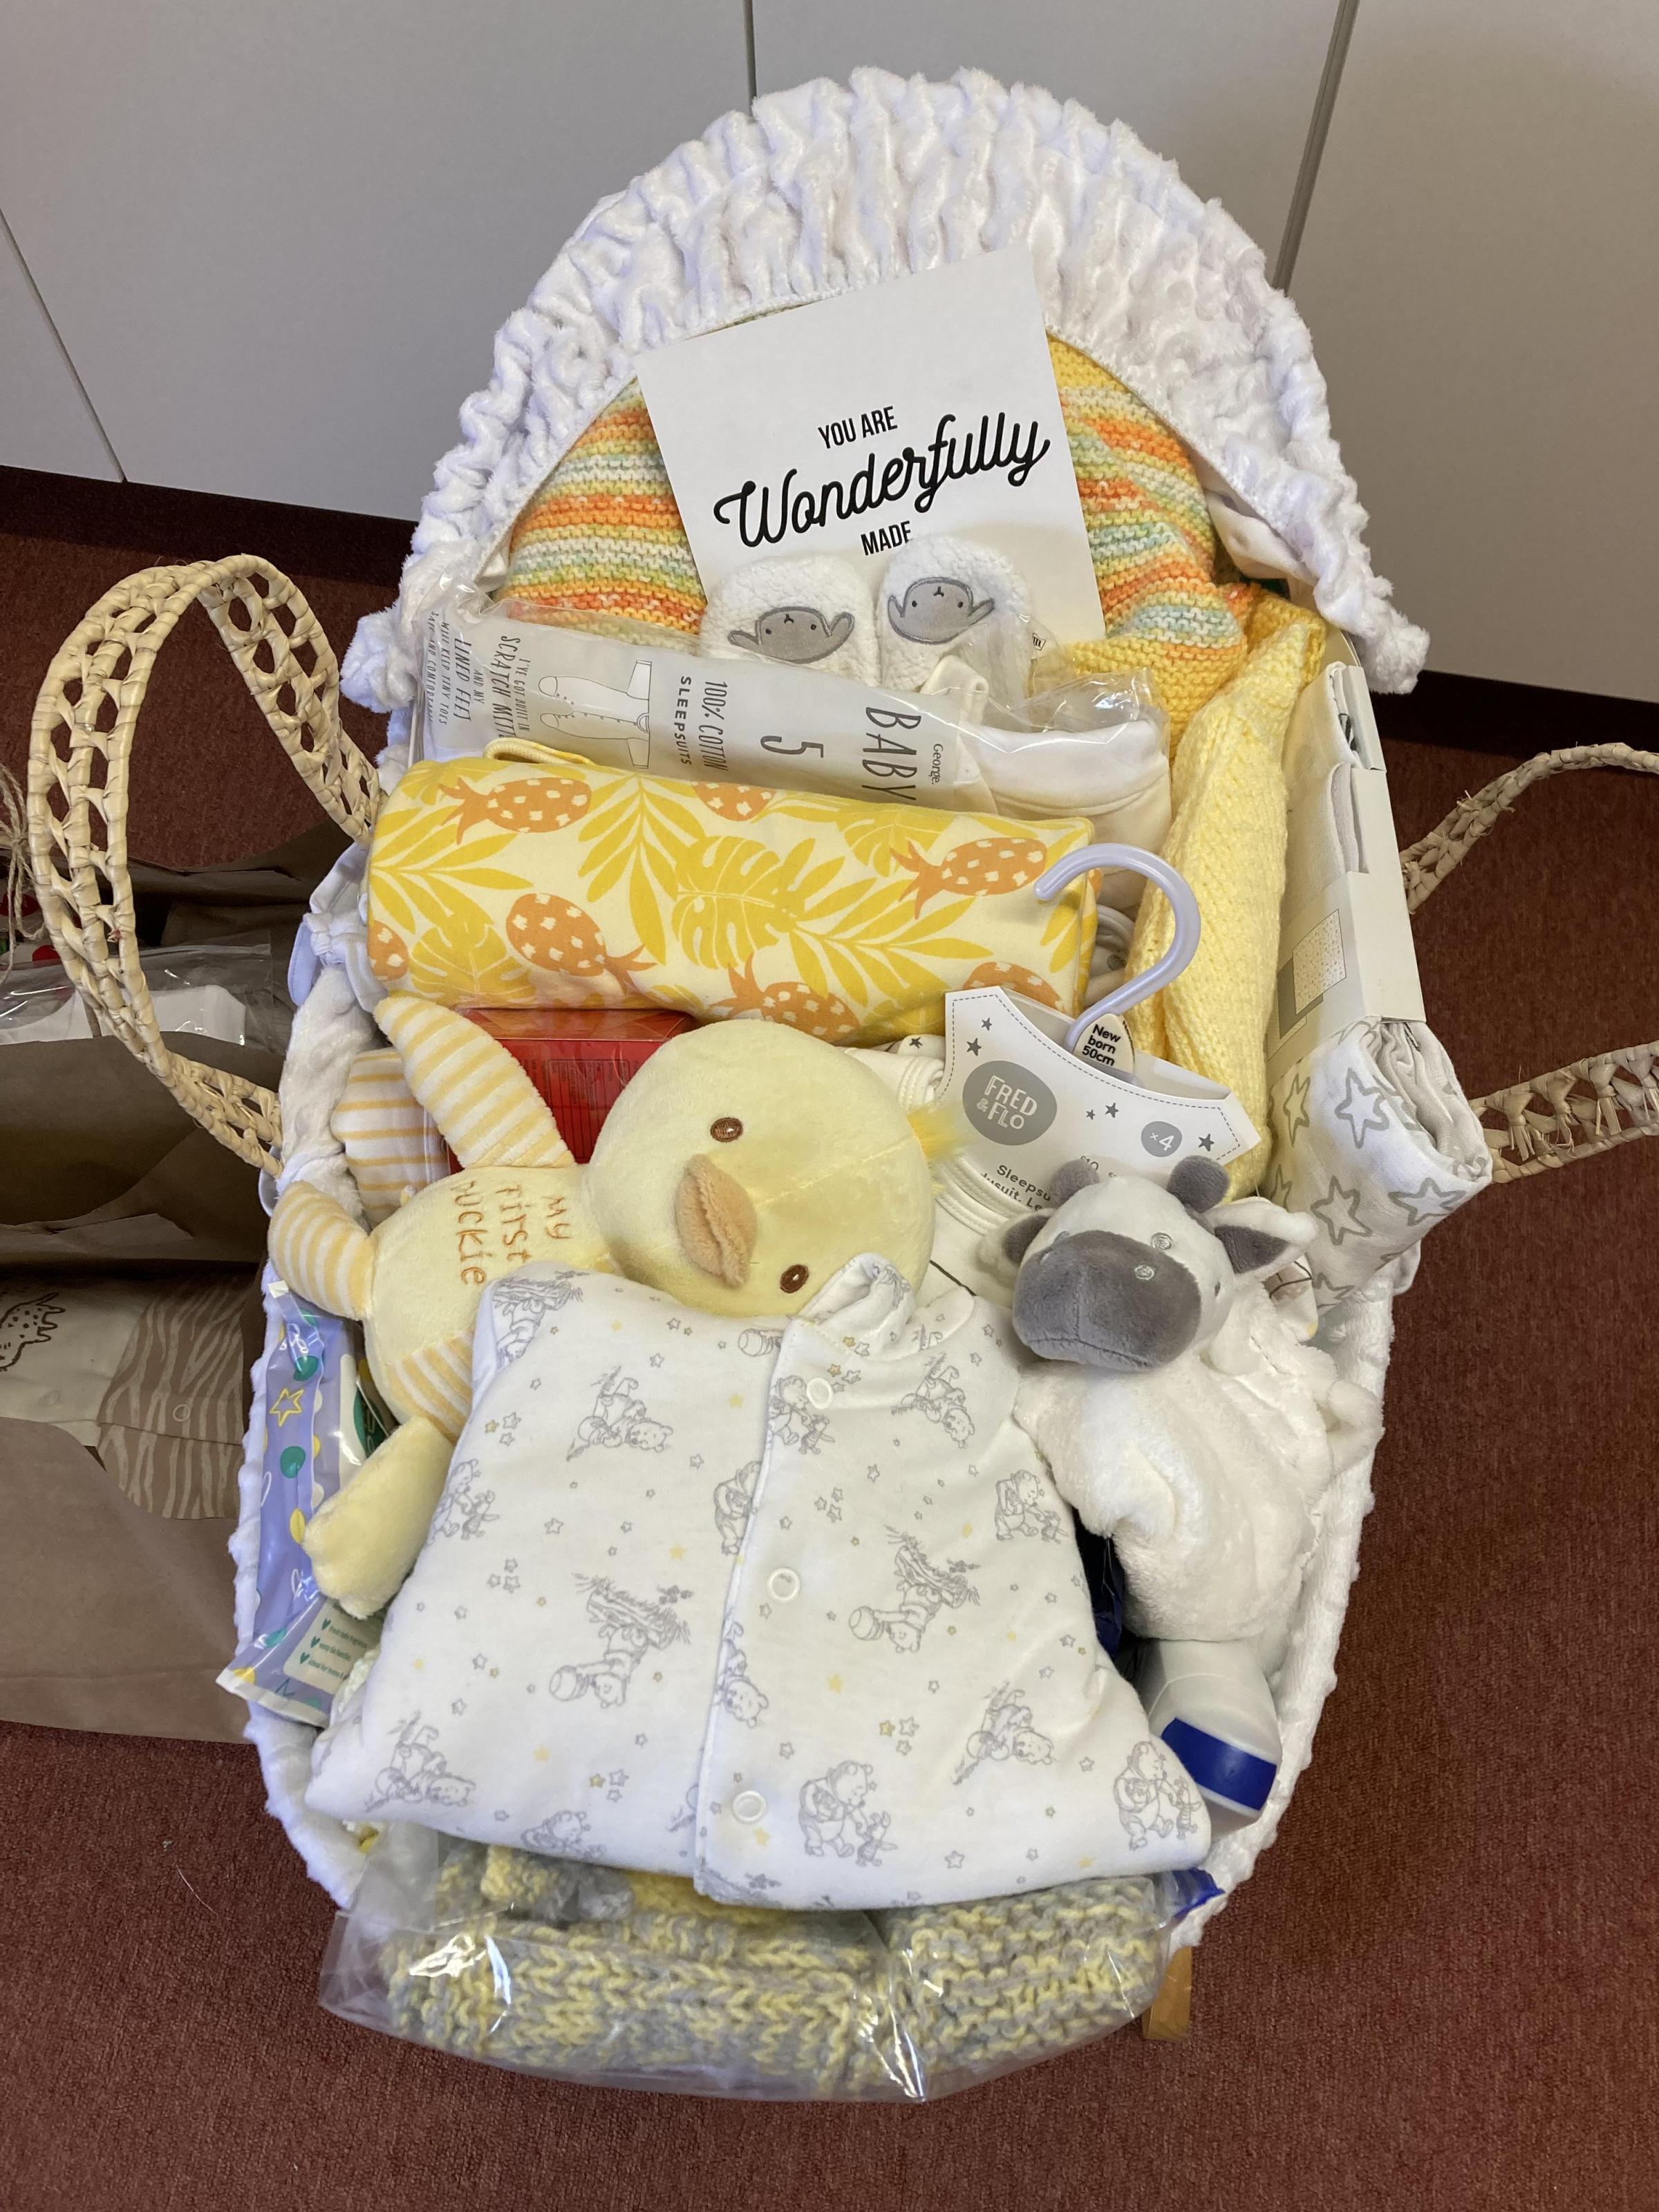 A Baby Basics hamper put together with donations.